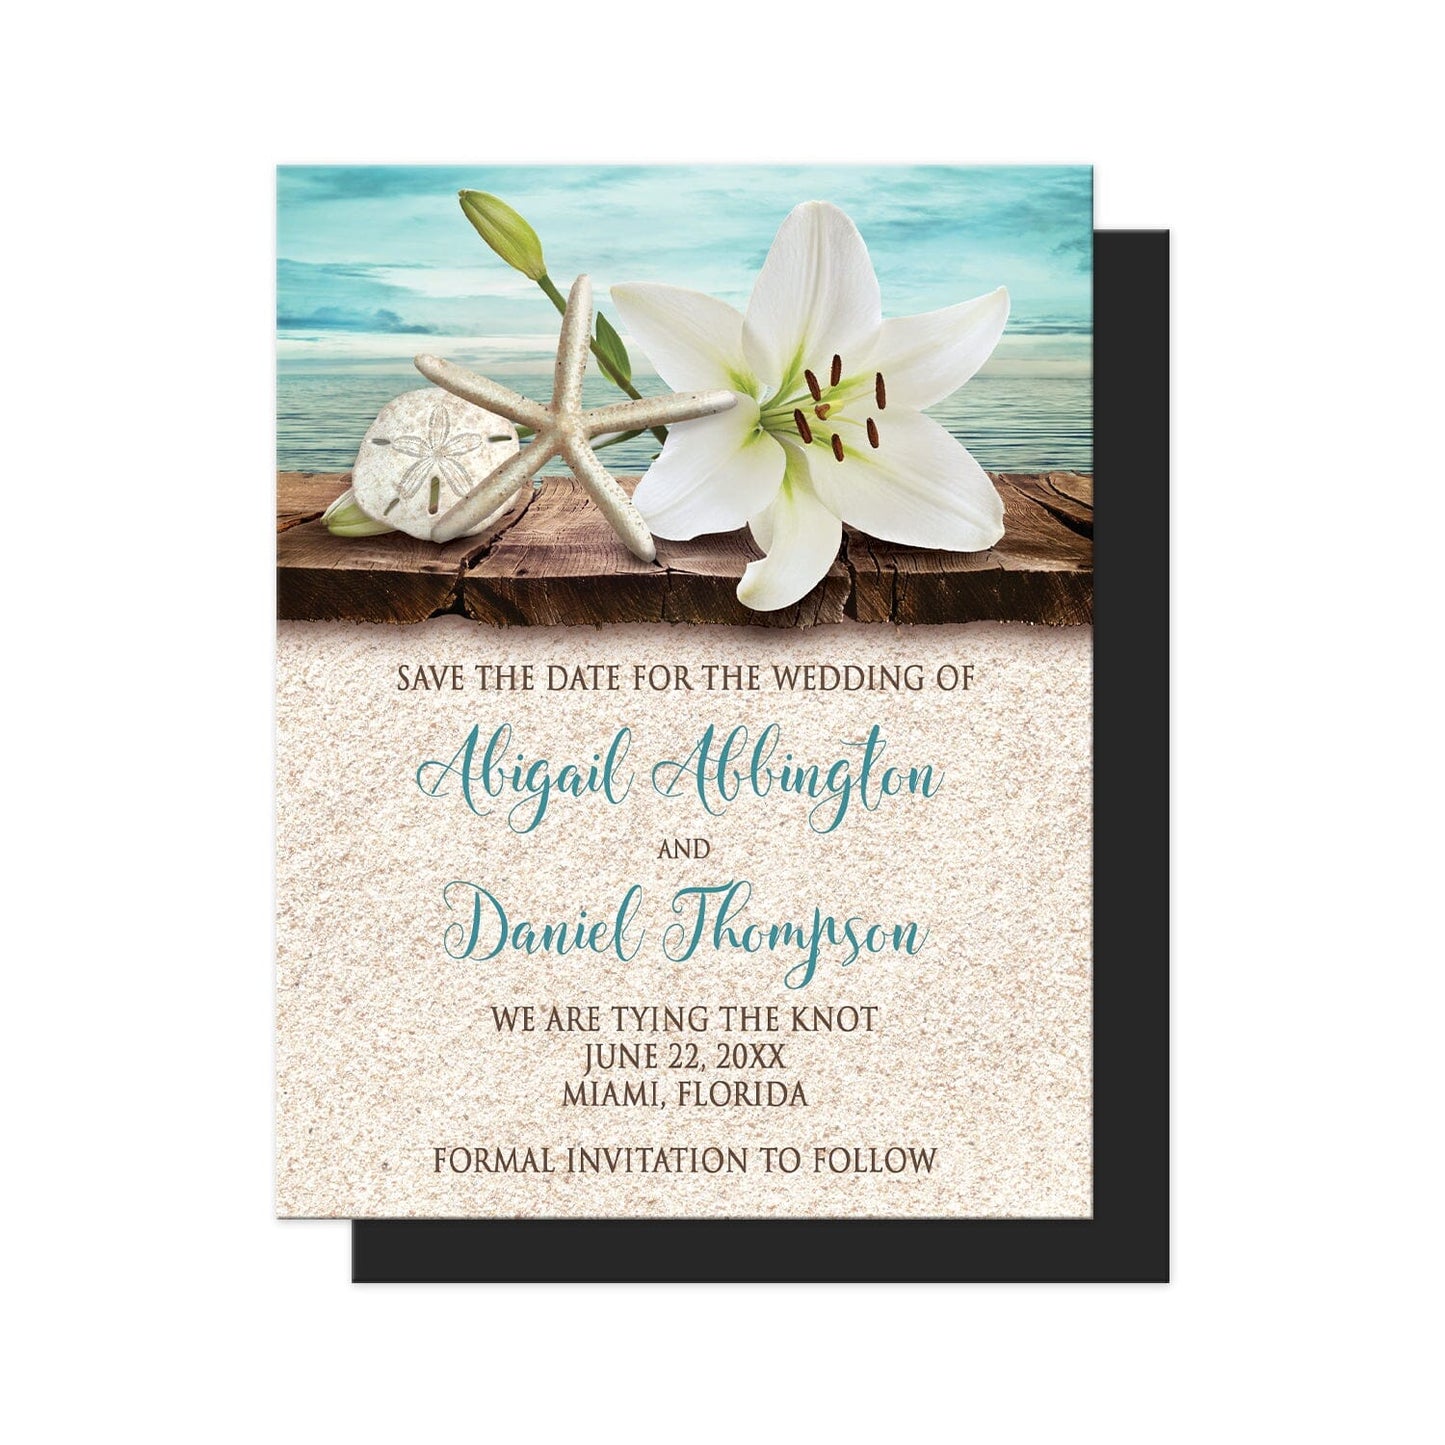 Lily Seashells and Sand Beach Save the Date Magnets at Artistically Invited. Beautiful tropical lily seashells and sand beach wedding save the date magnets with an elegant white lily, a starfish, and a sand dollar on a rustic wood dock overlooking the open water. Your personalized wedding date announcement details are custom printed in dark brown and teal over a beige sand background design.